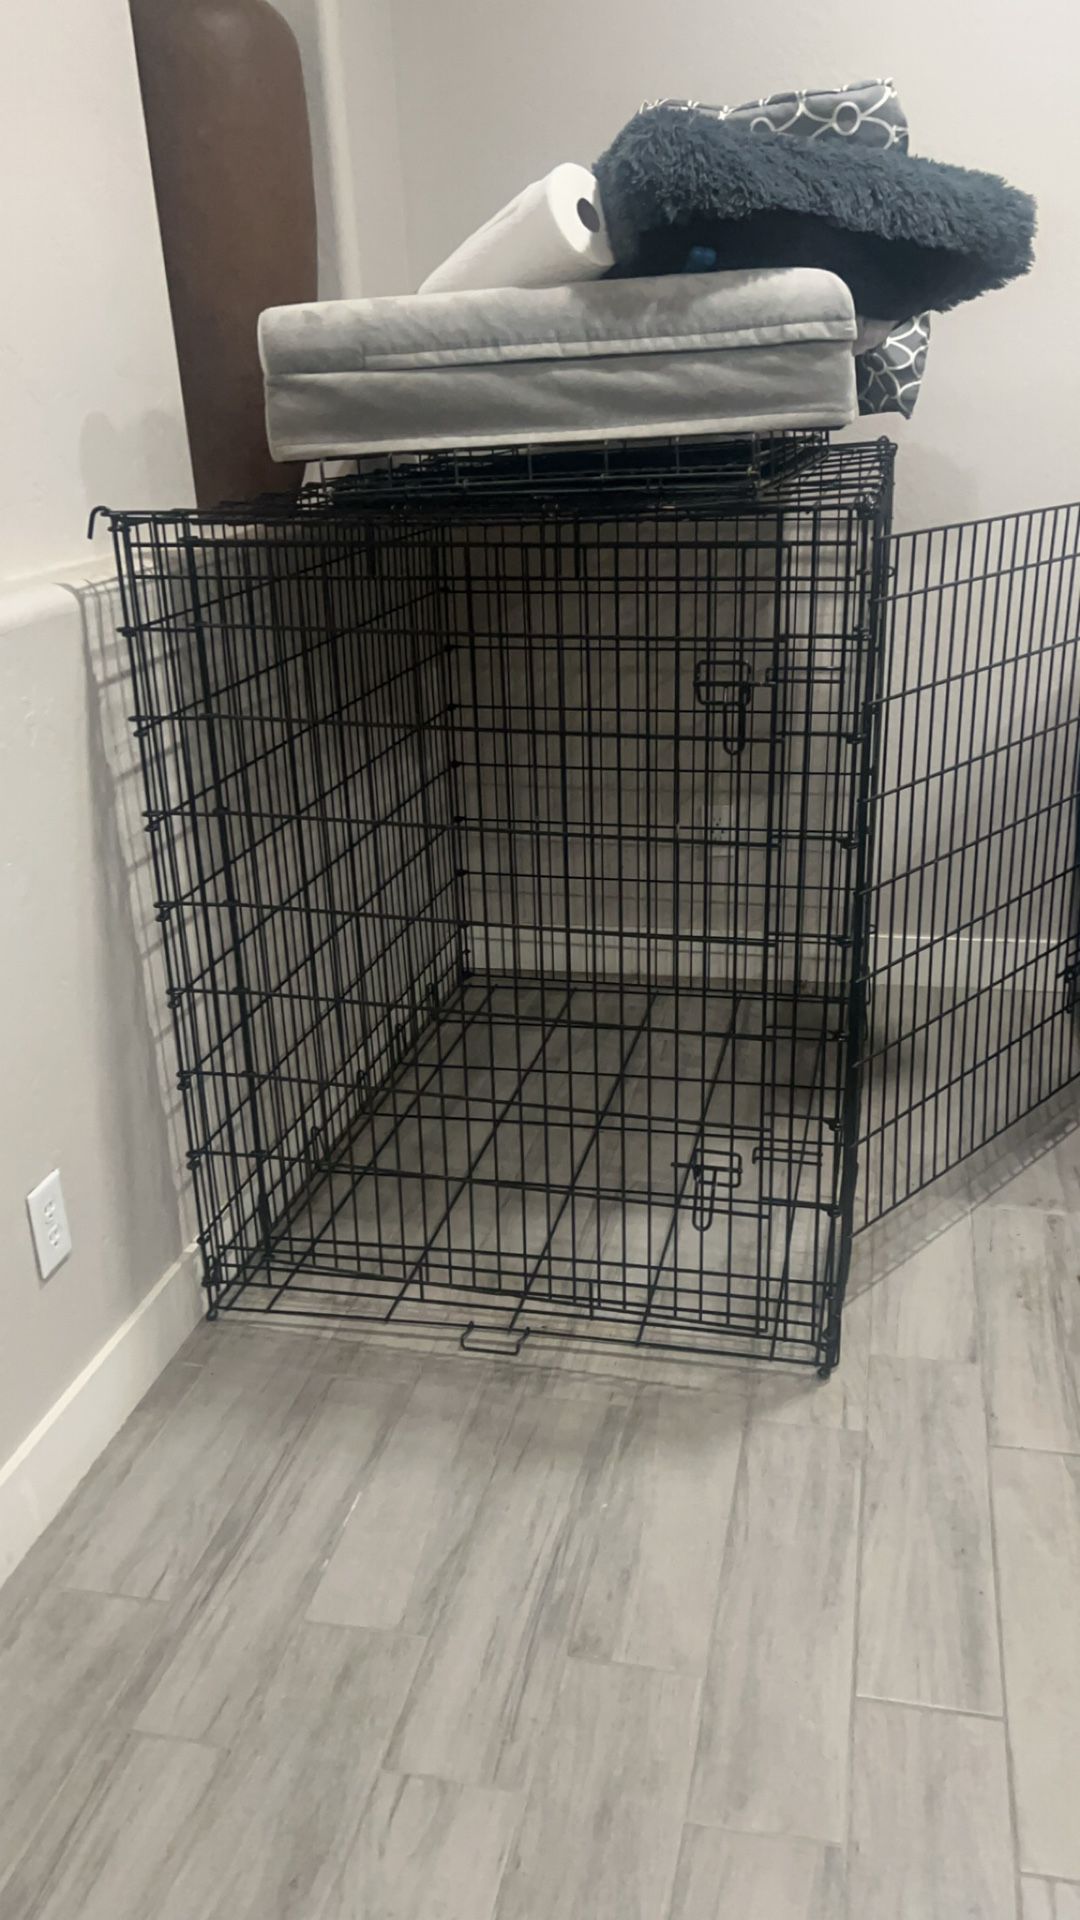 Xxl Dog Crate Comes With Bottom Tray  45H 54L 36W